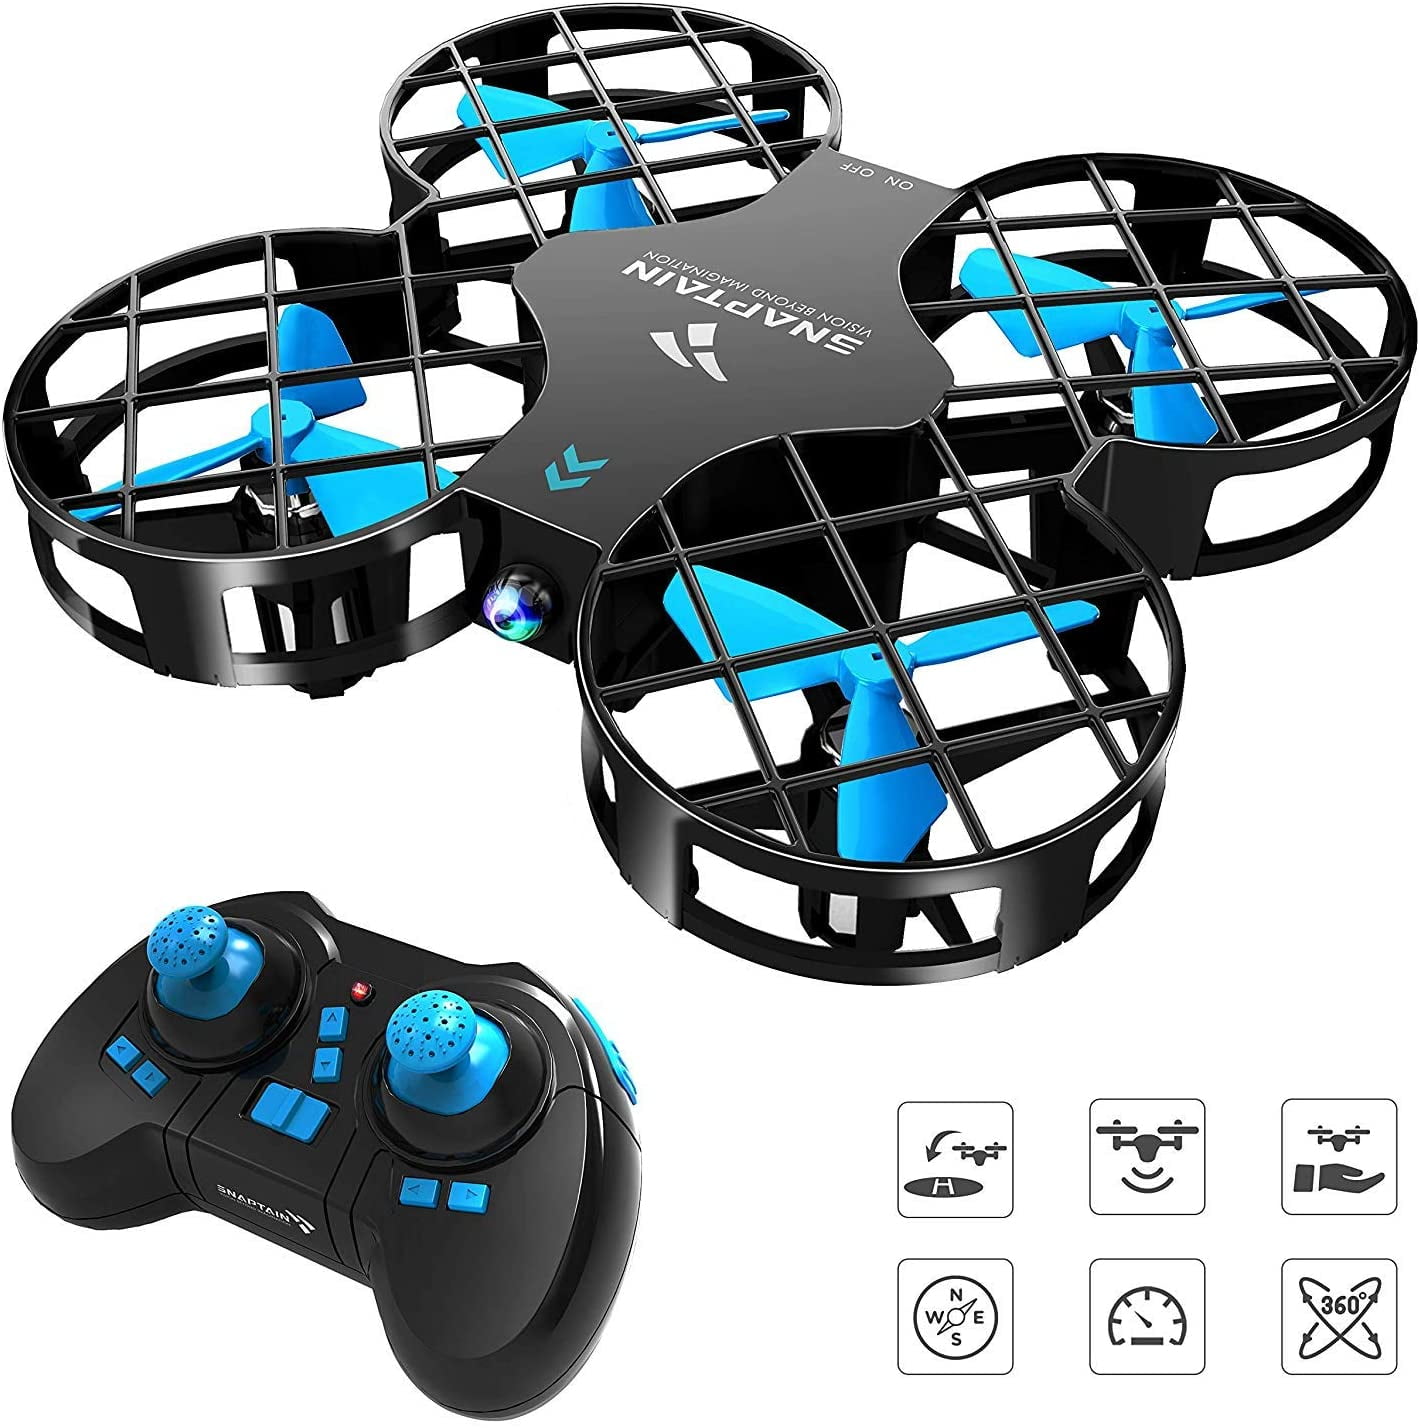 Mini Drone for Kids and Beginners Mini Drones Quadcopter with LED Lights Details about   Drone 